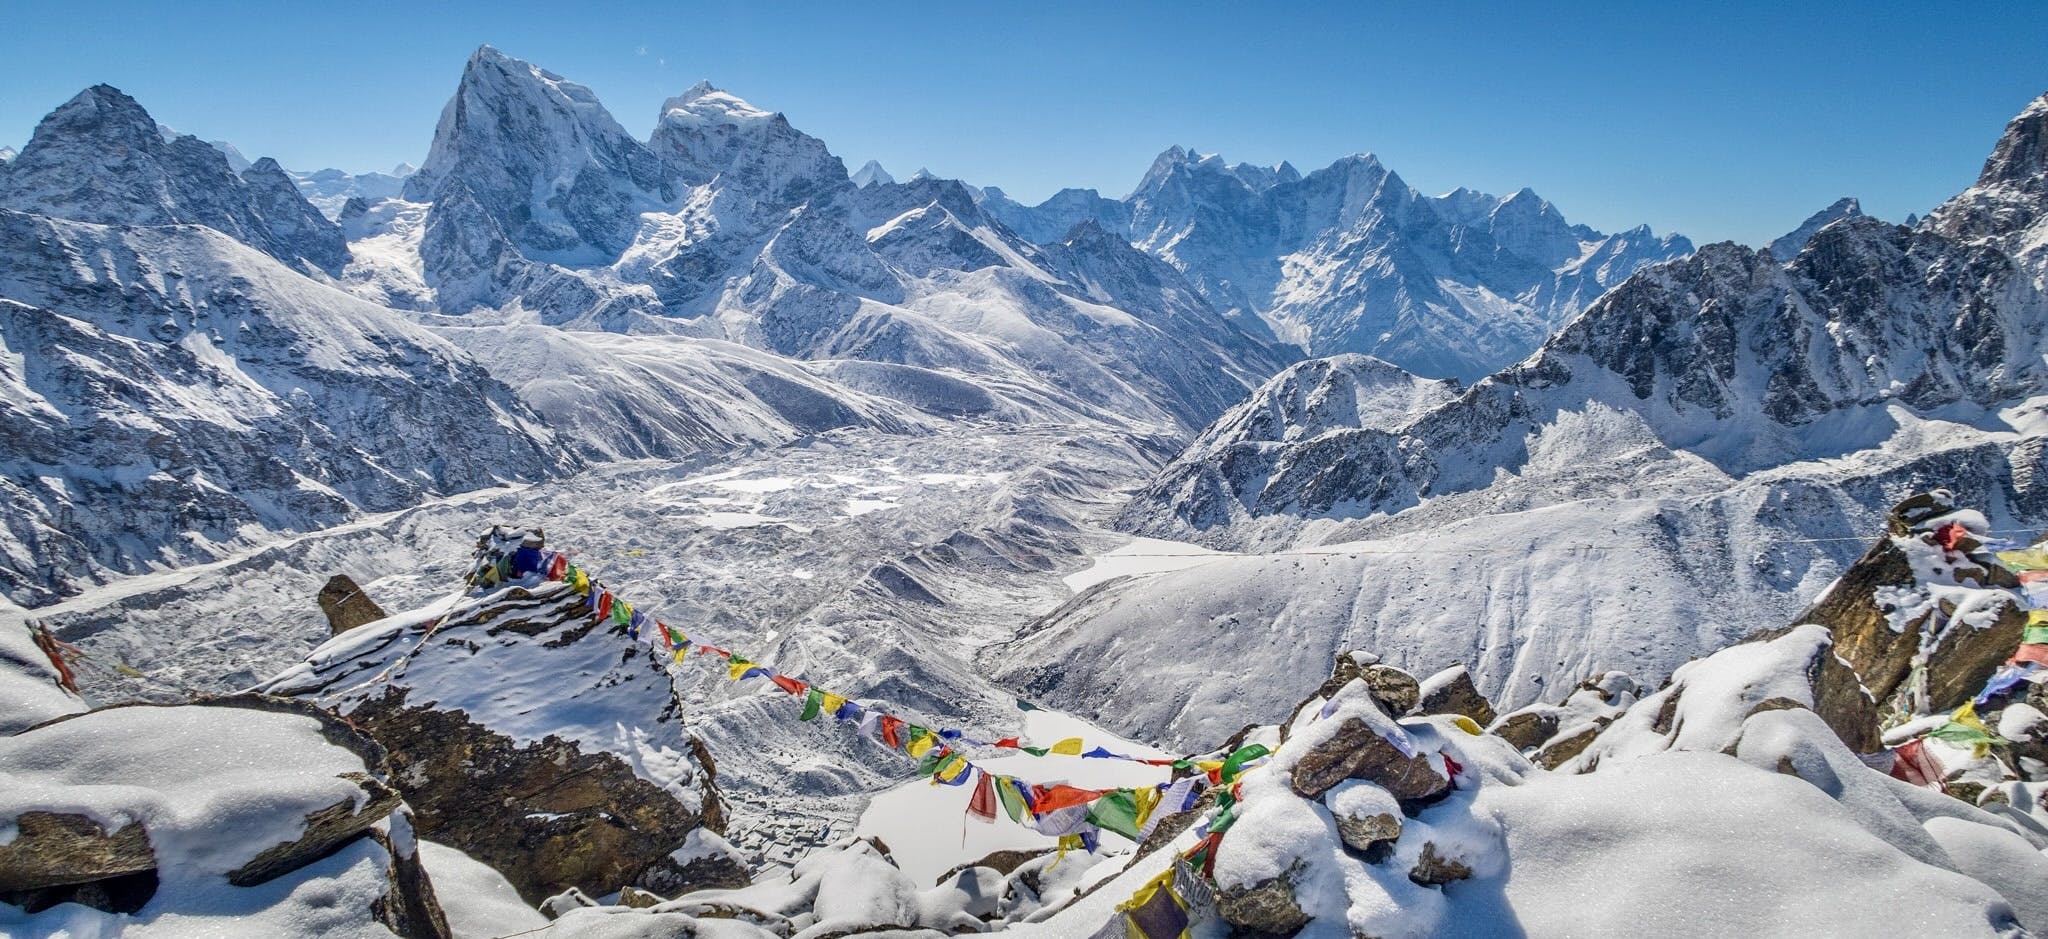 The Complete Guide for Everest Base Camp and Gokyo Valley trek